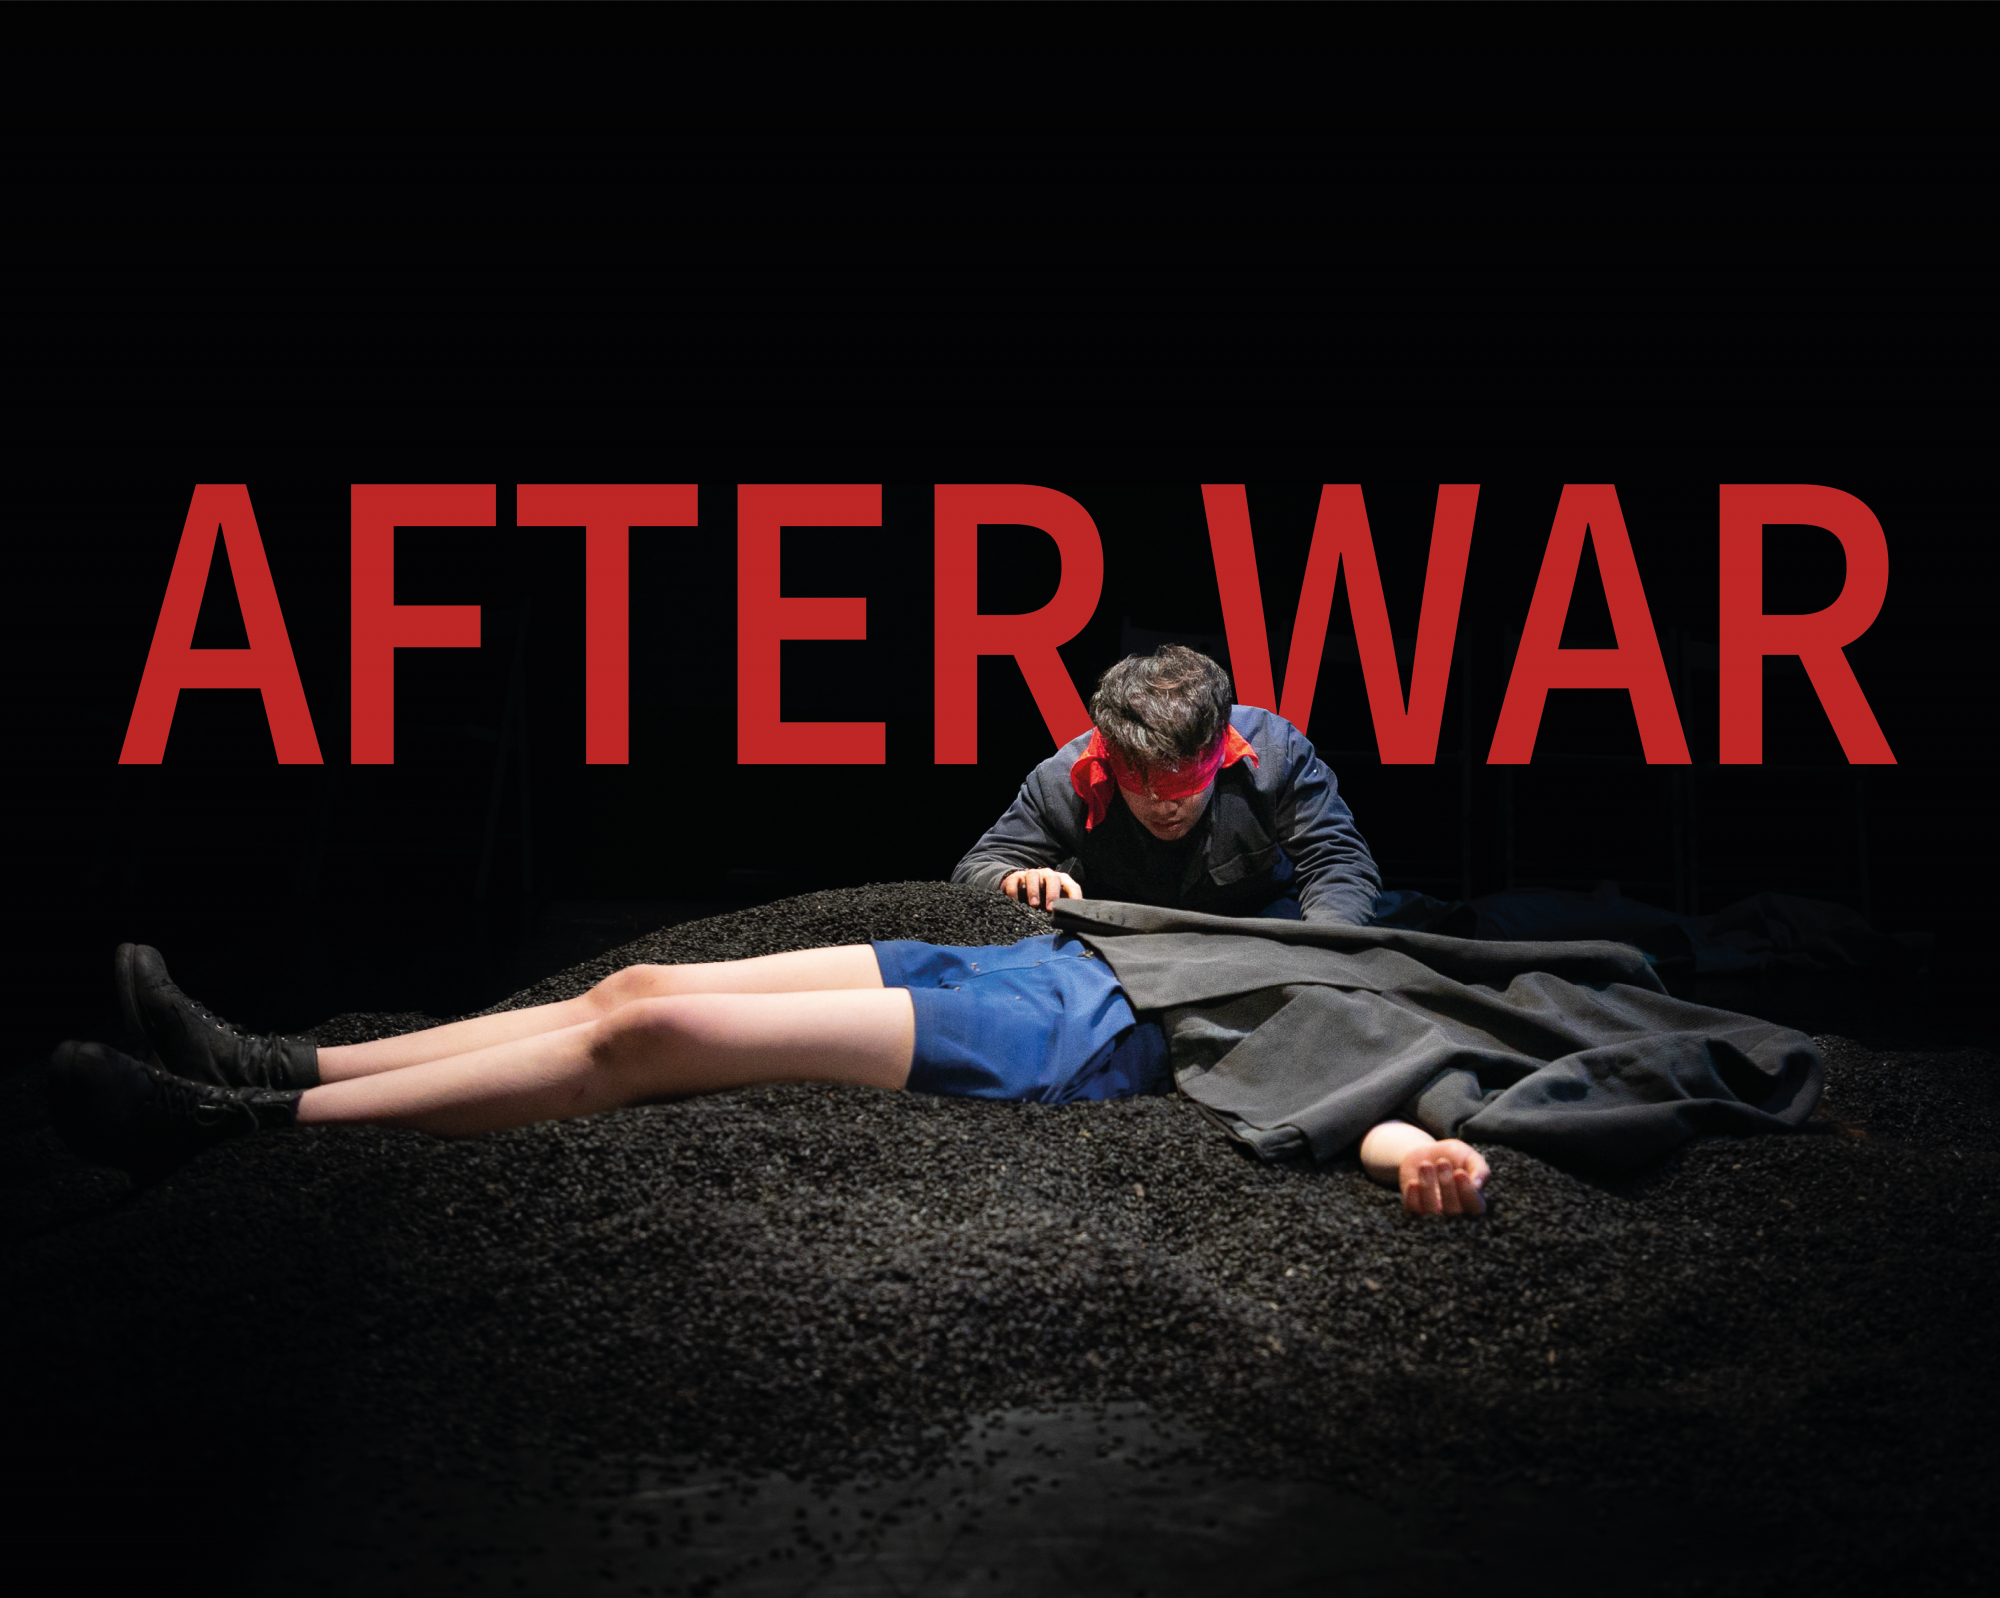 The performance AFTER WAR takes the audience into the claustrophobic universe of war